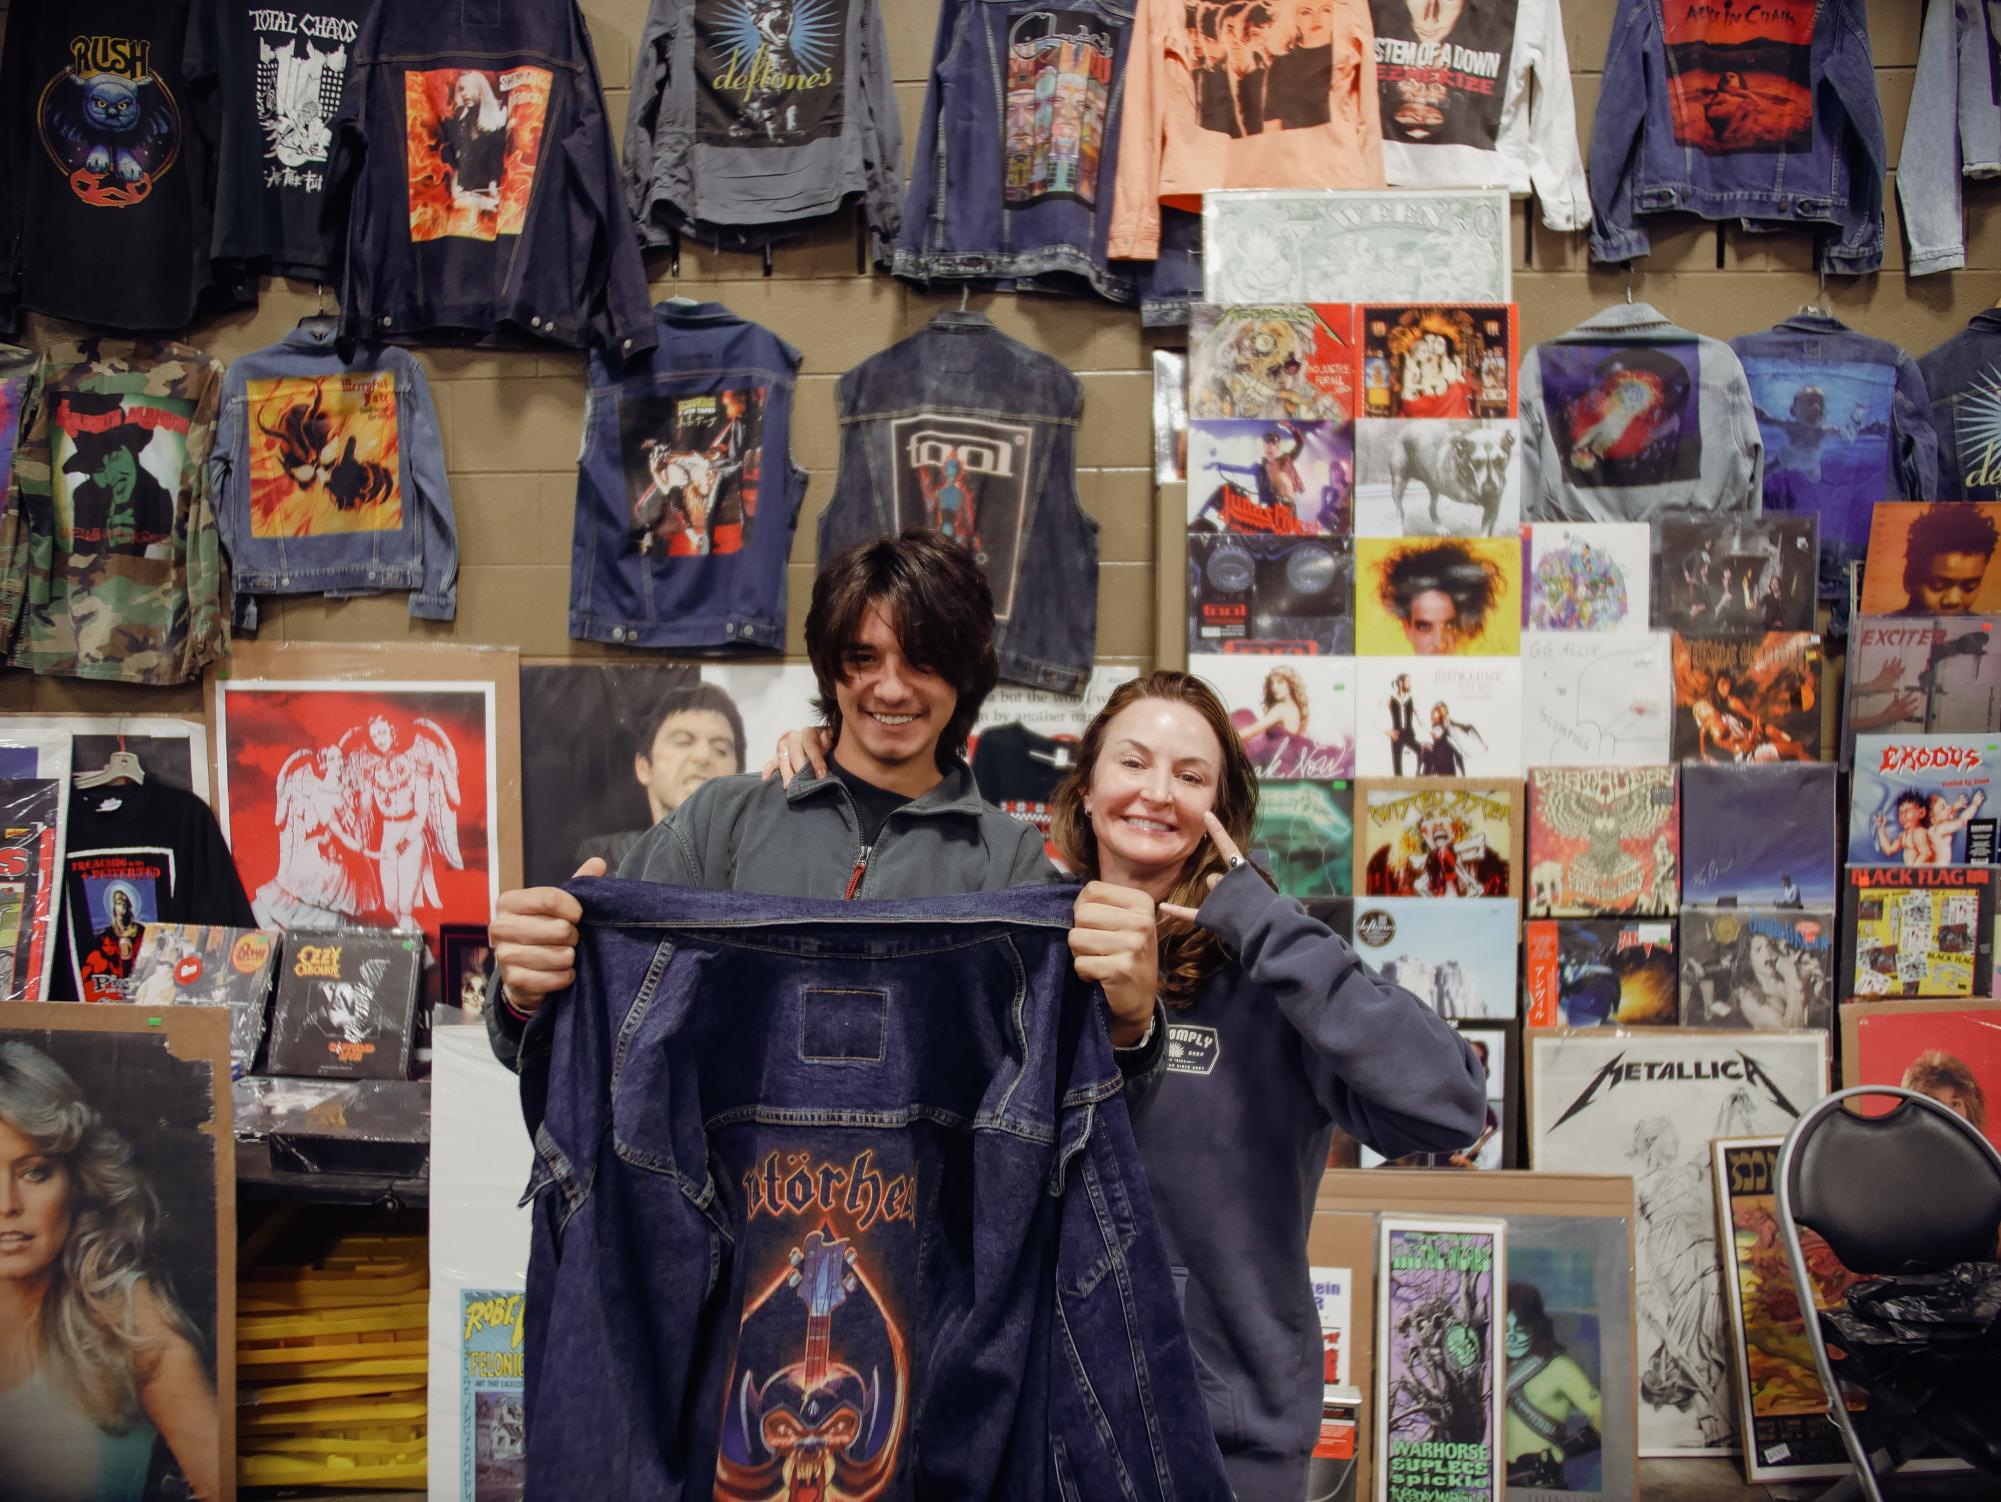 Born Late Records displays a custom Motörhead denim jacket in front of their booth. The company buys, sells and trades vinyl, CDs, tapes, shirts and other memorabilia. Their storefront is located at 2920 Race Street, Fort Worth, TX, and their Instagram is @bornlaterecords.